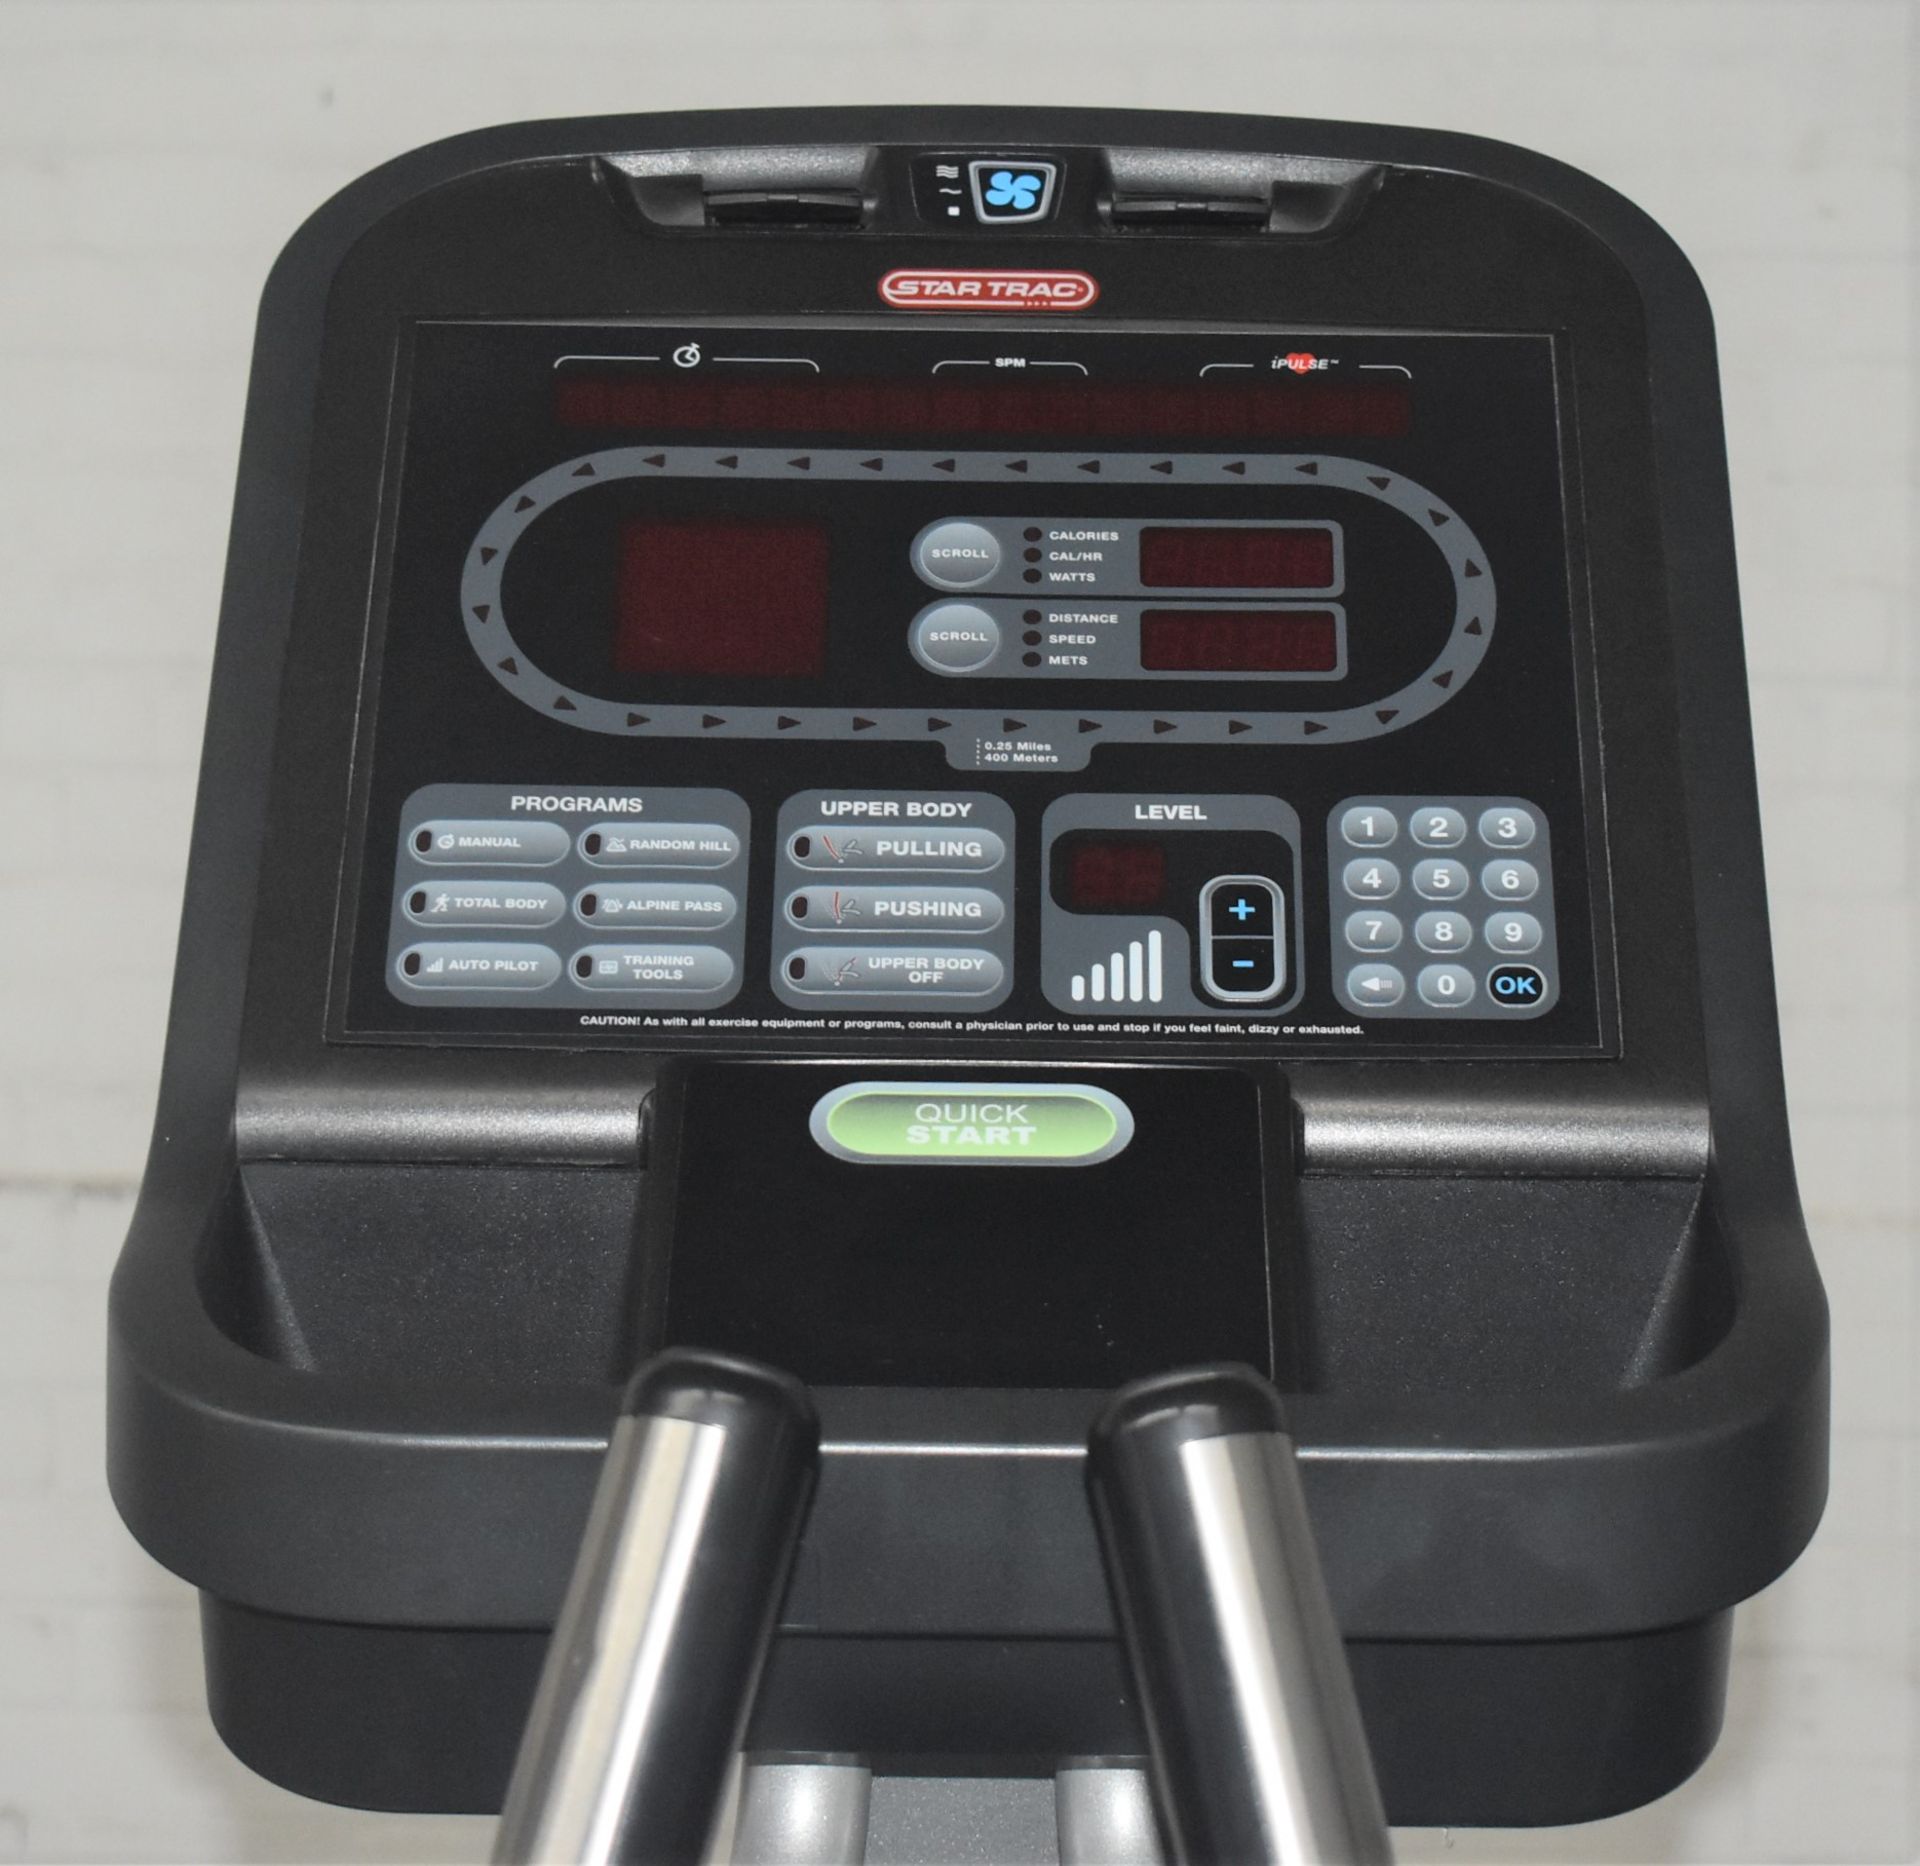 1 x Star Trac Commercial Excercise Elliptical Cross Trainer - CL011 - Ref SL307 GIT -  Location: - Image 8 of 9